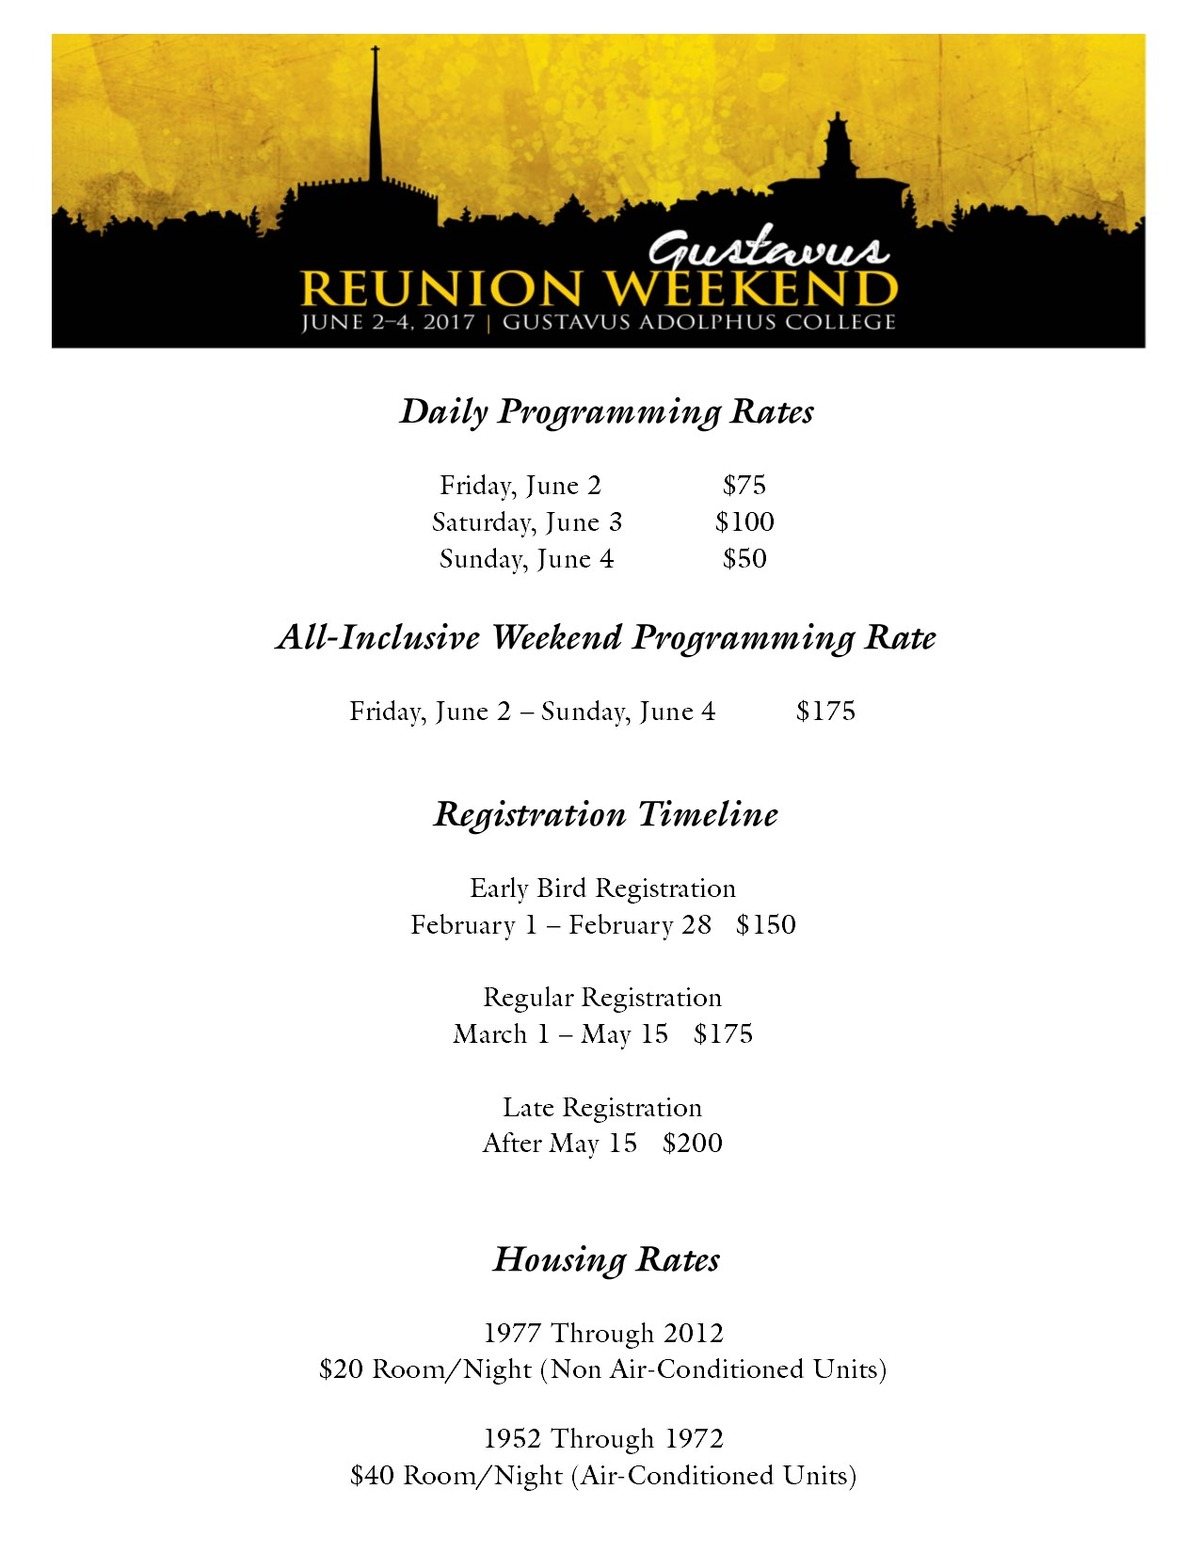 Reunion Weekend 2017 Pricing Overview